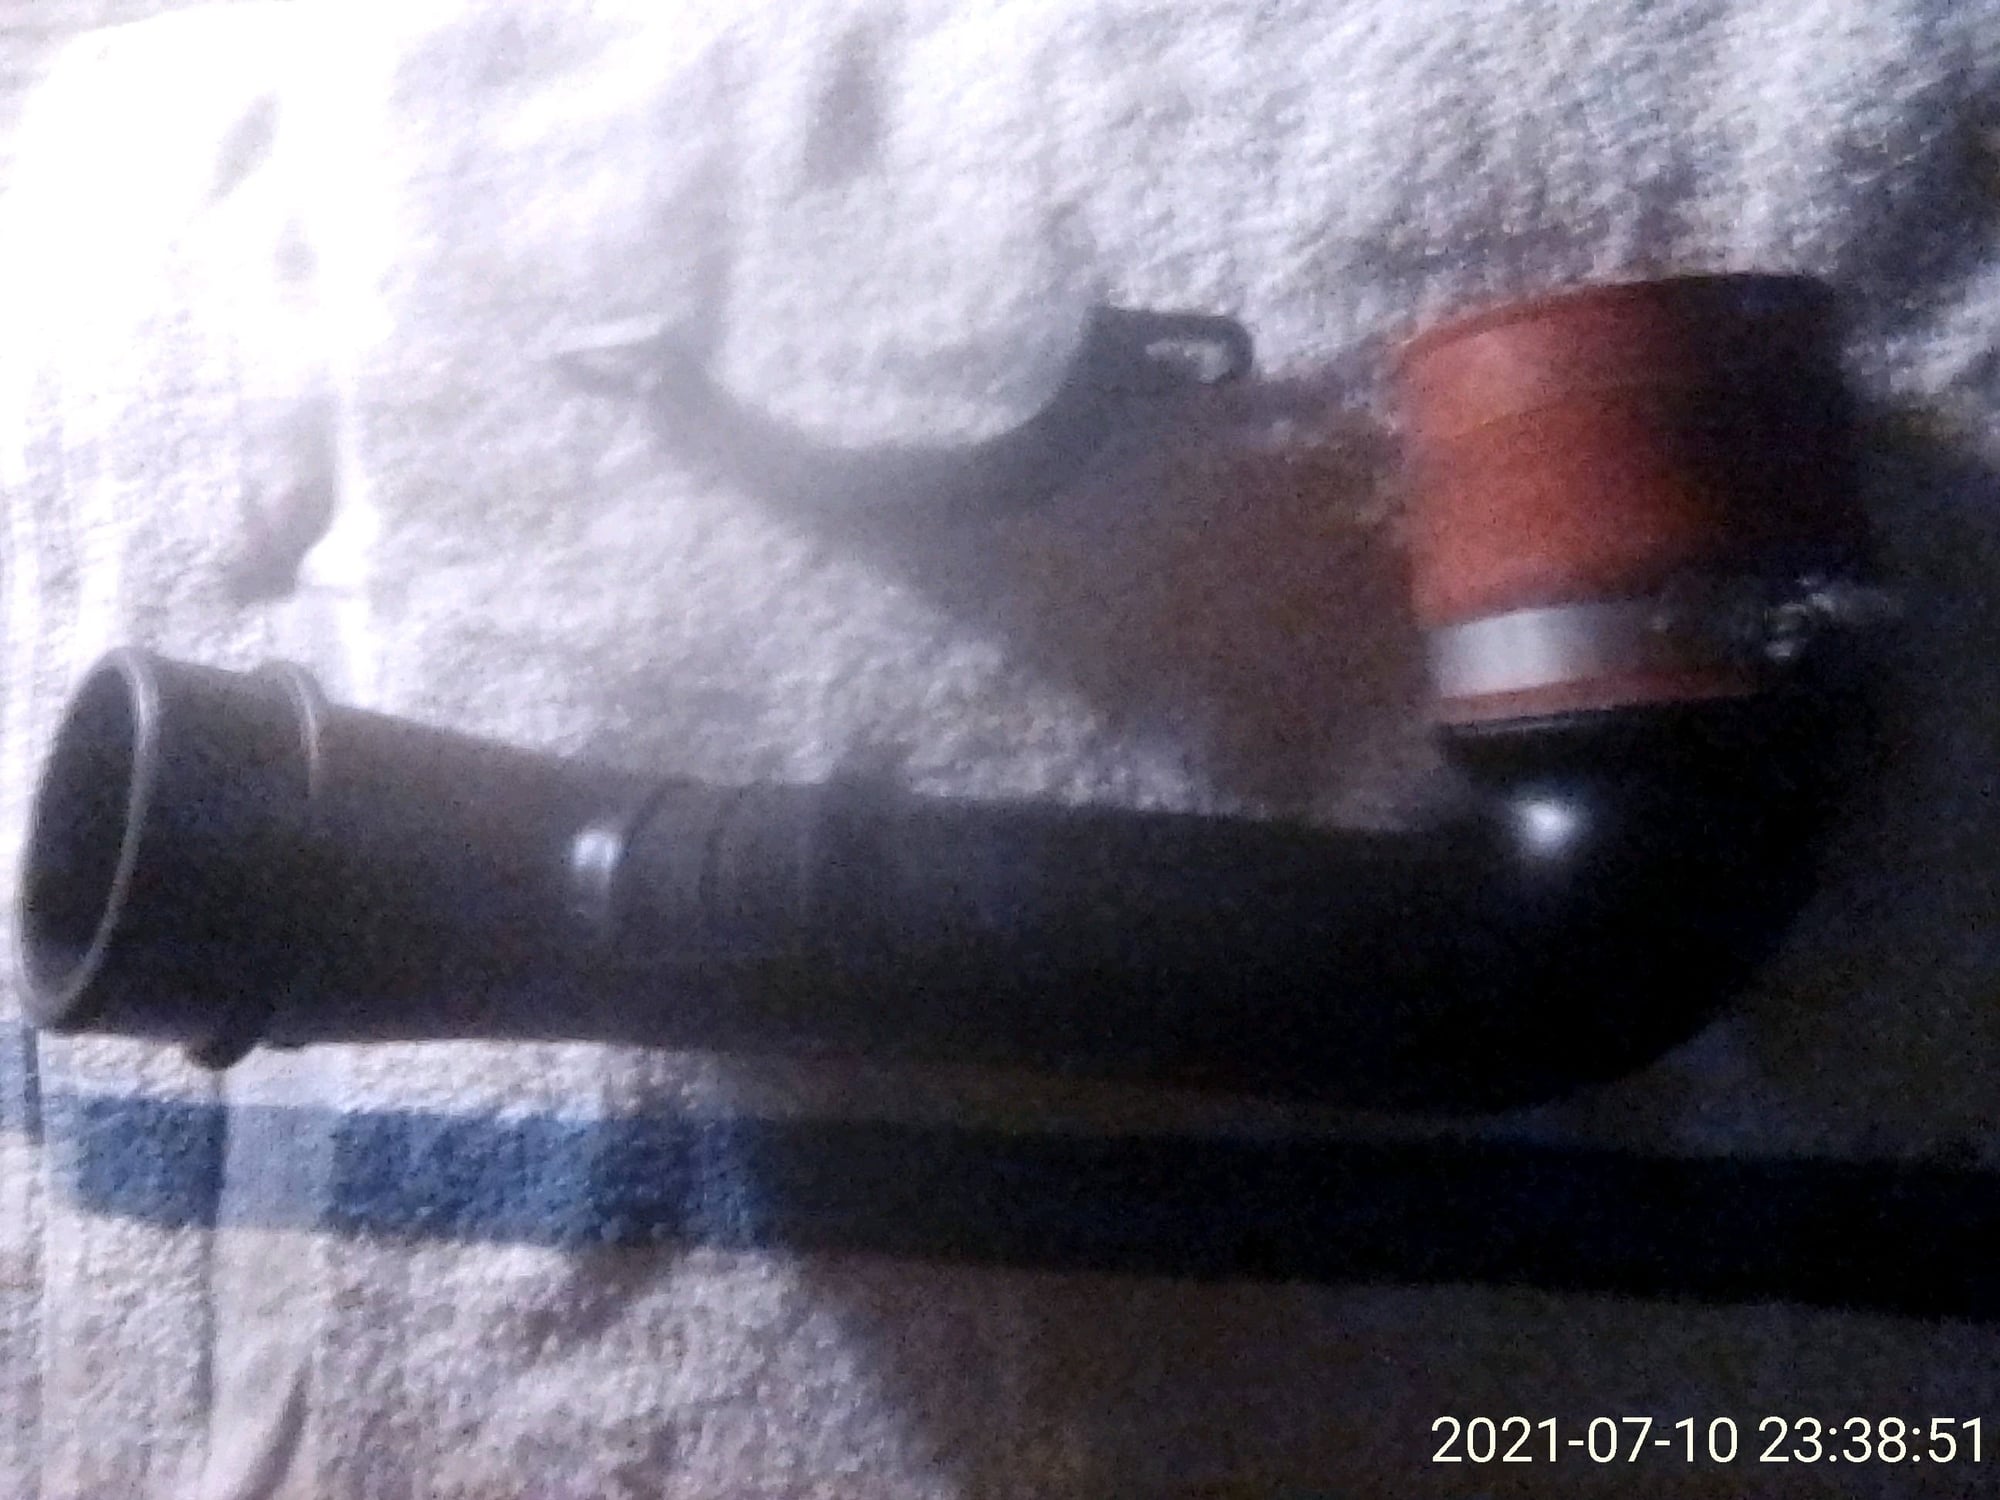 Miscellaneous - FD OEM Crossover Air Intake Pipe & Bracket - Used - San Jose, CA 95121, United States